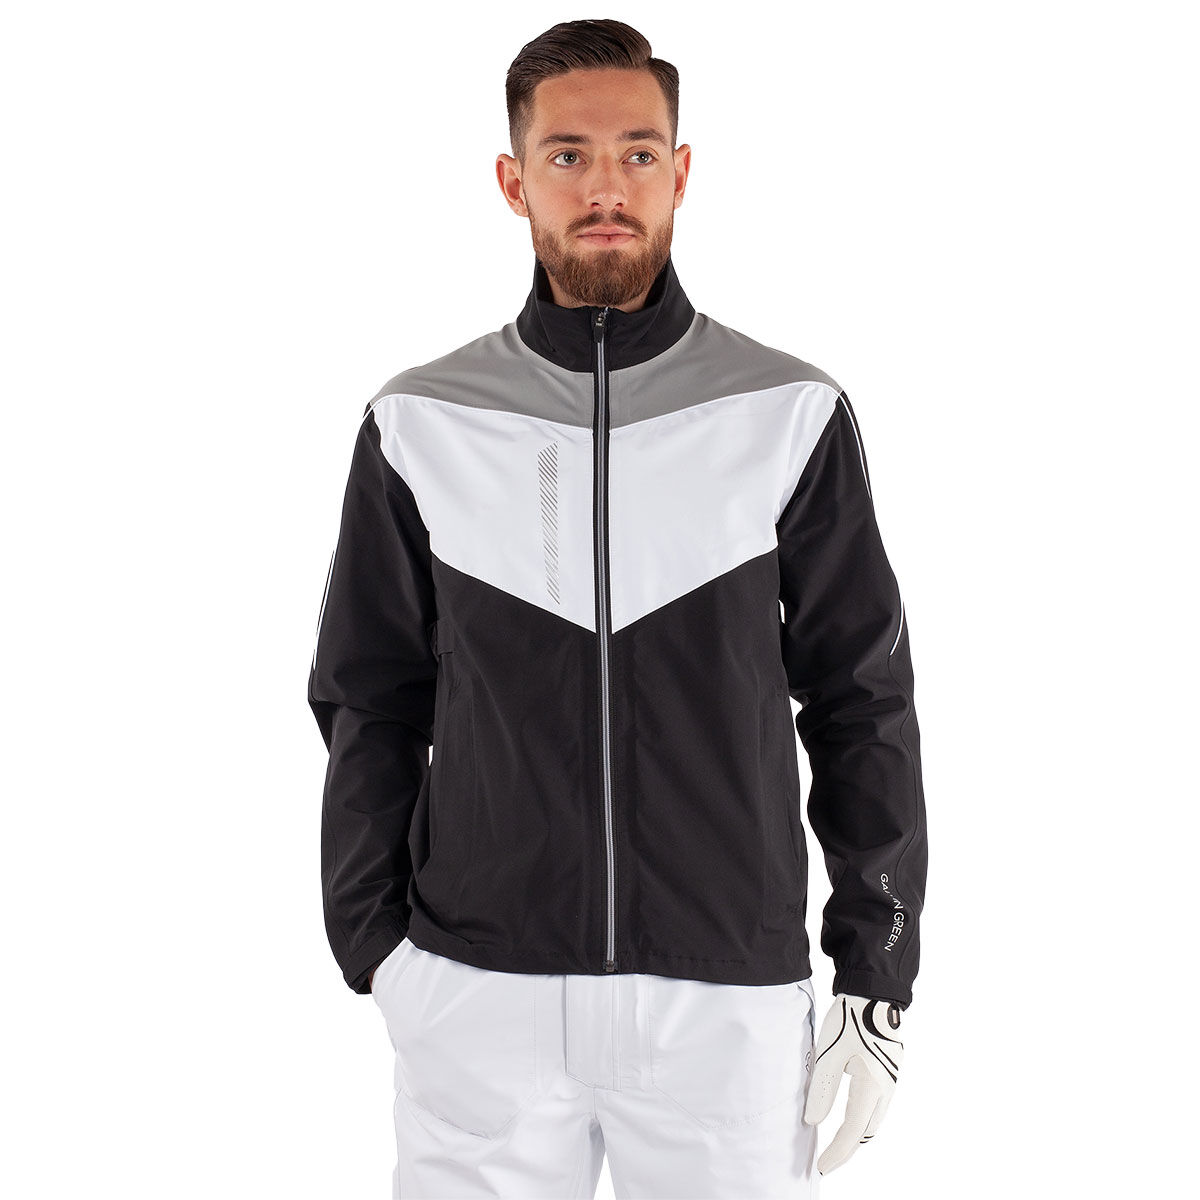 Galvin Green Mens Black and White Waterproof Colour Block Armstrong Golf Jacket, Size: Small| American Golf von Galvin Green